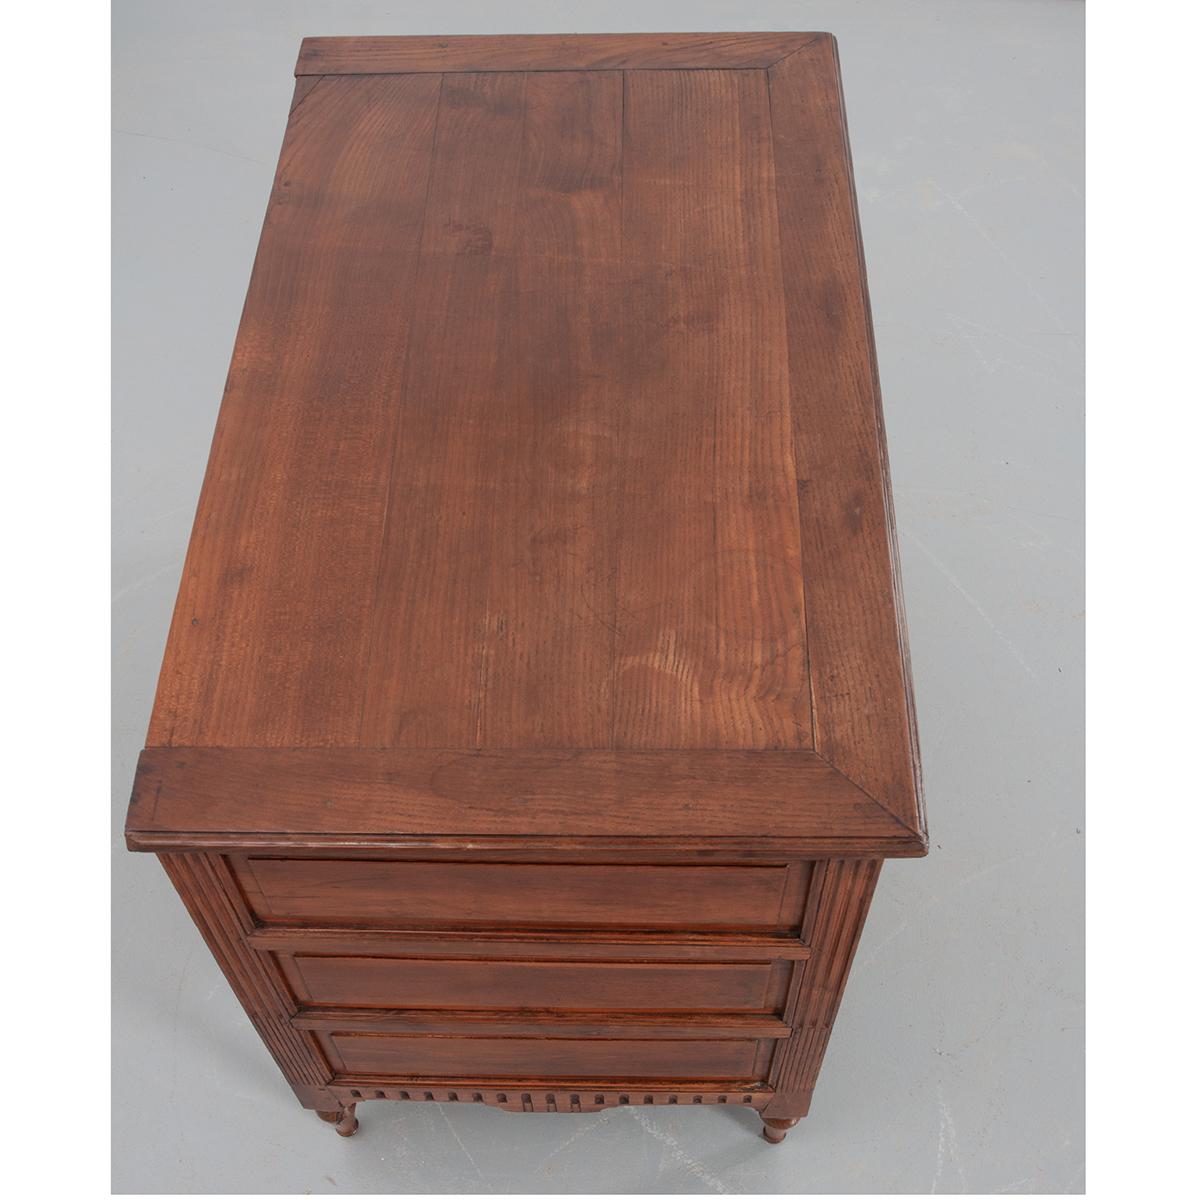 A gorgeous French walnut commode from the early 1800s. The shaped walnut top sits over the well-thought-out and detailed commode, with fluted corners, wonderful raised-panel drawer fronts and brass drawer pulls and escutcheon plates. The sides are